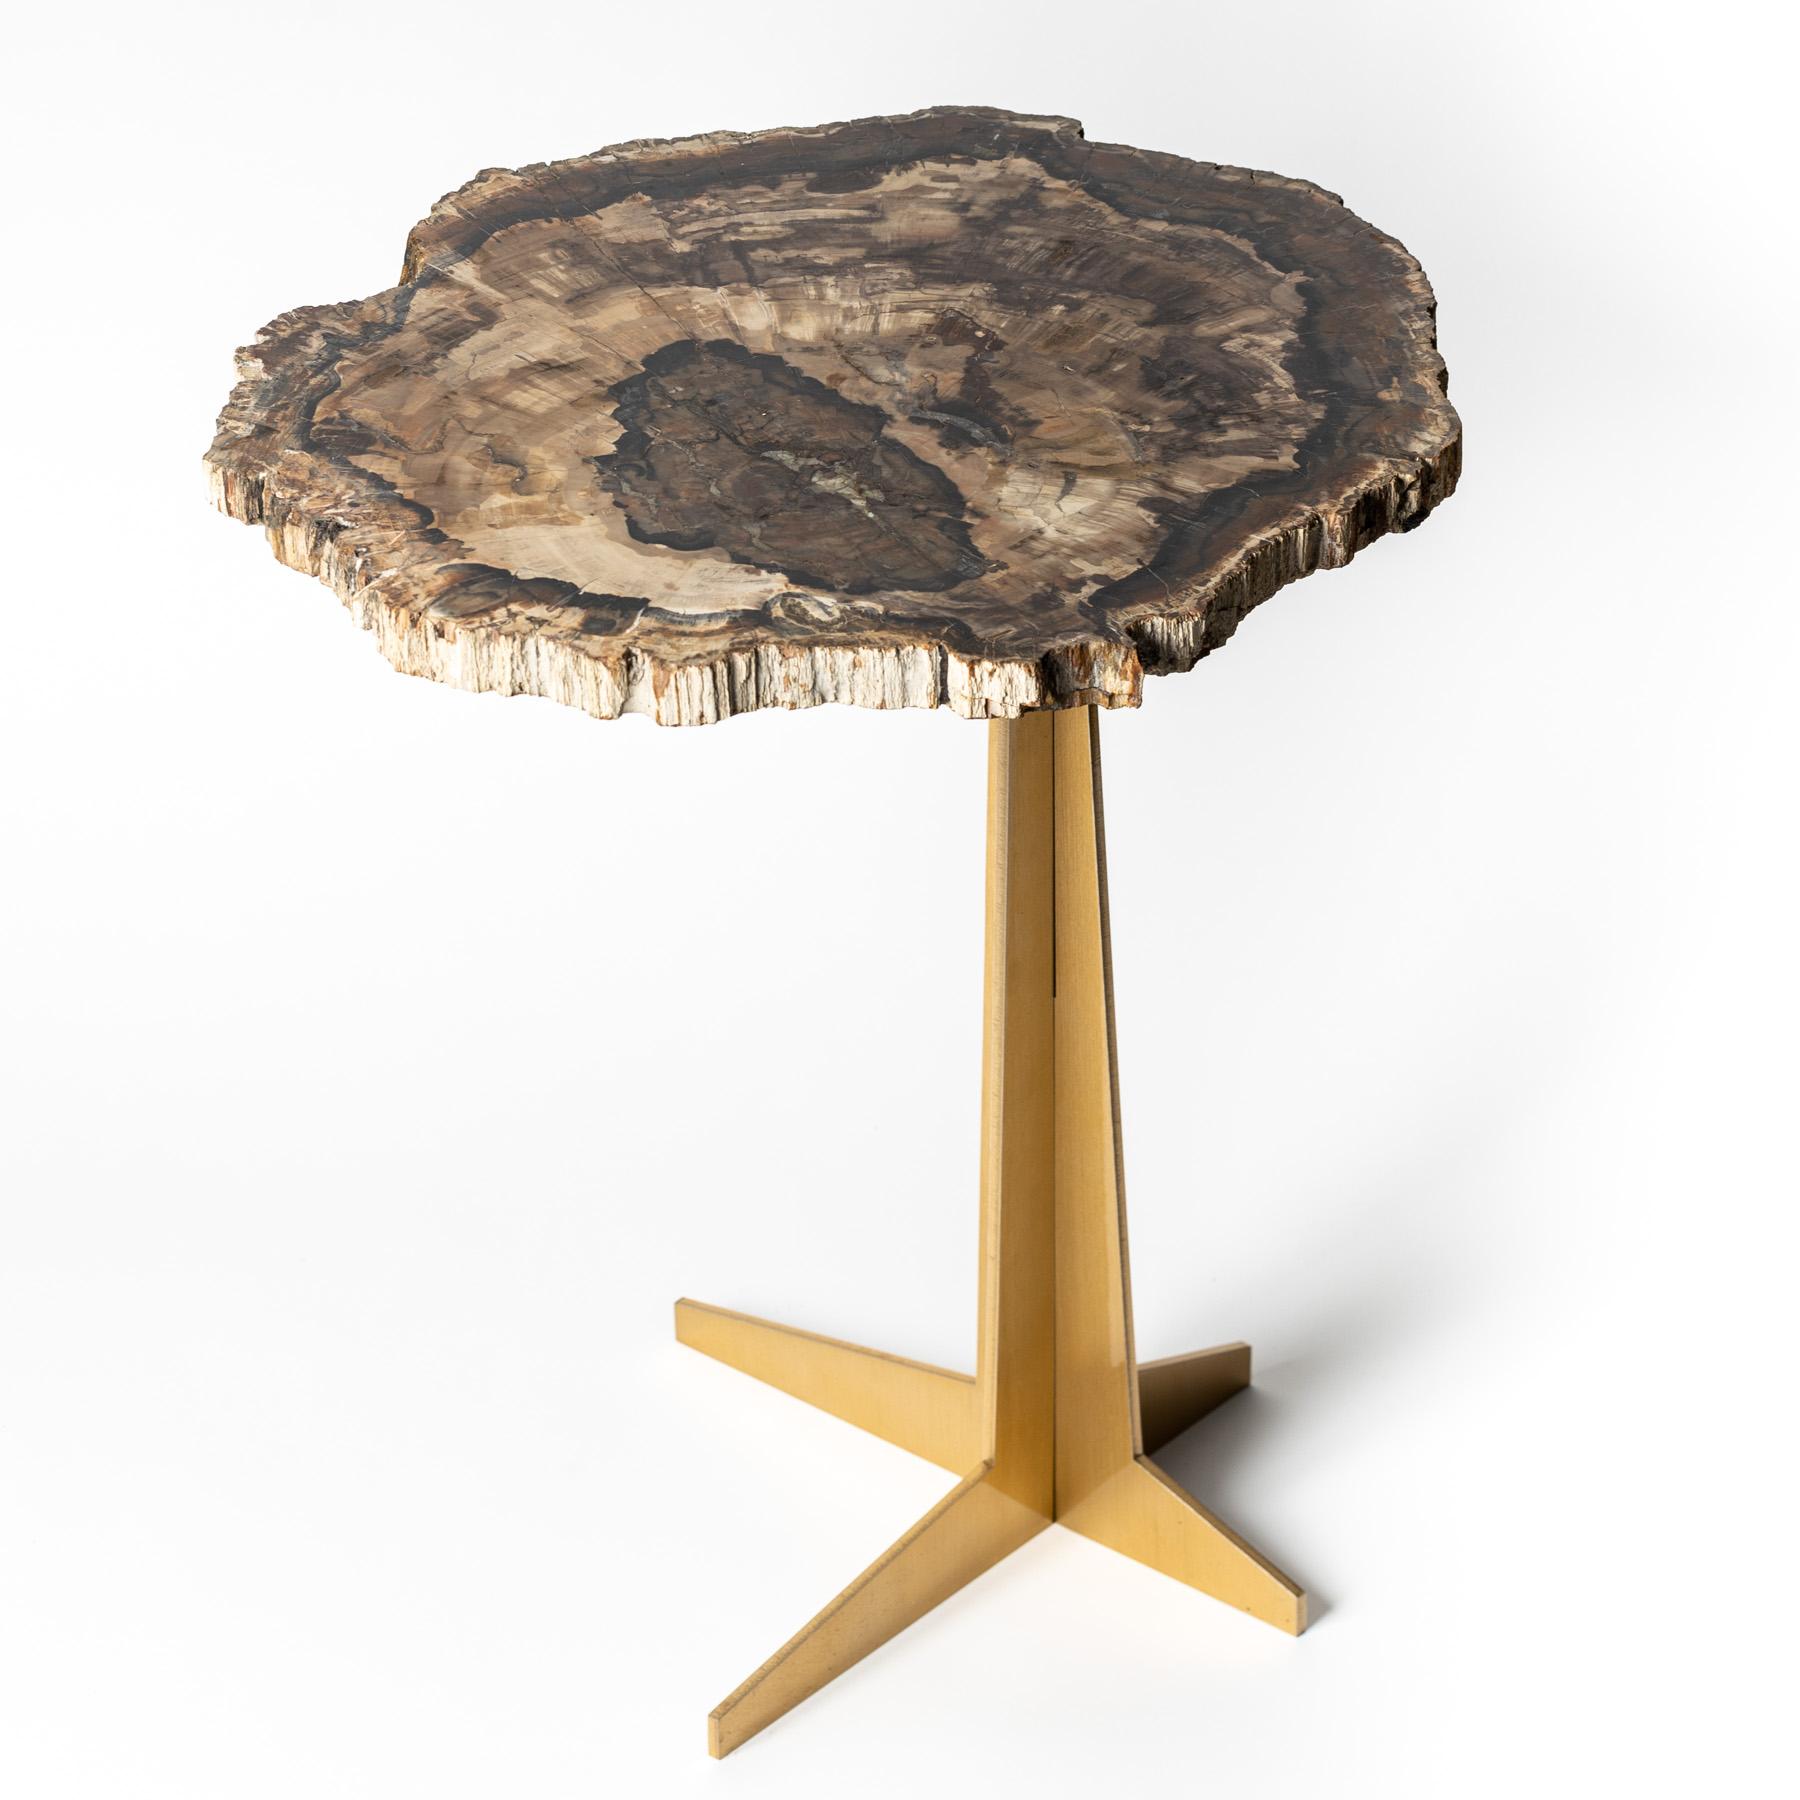 Mexican Side or Cocktail Table, Petrified Wood Slab with Gold Color Metal Base